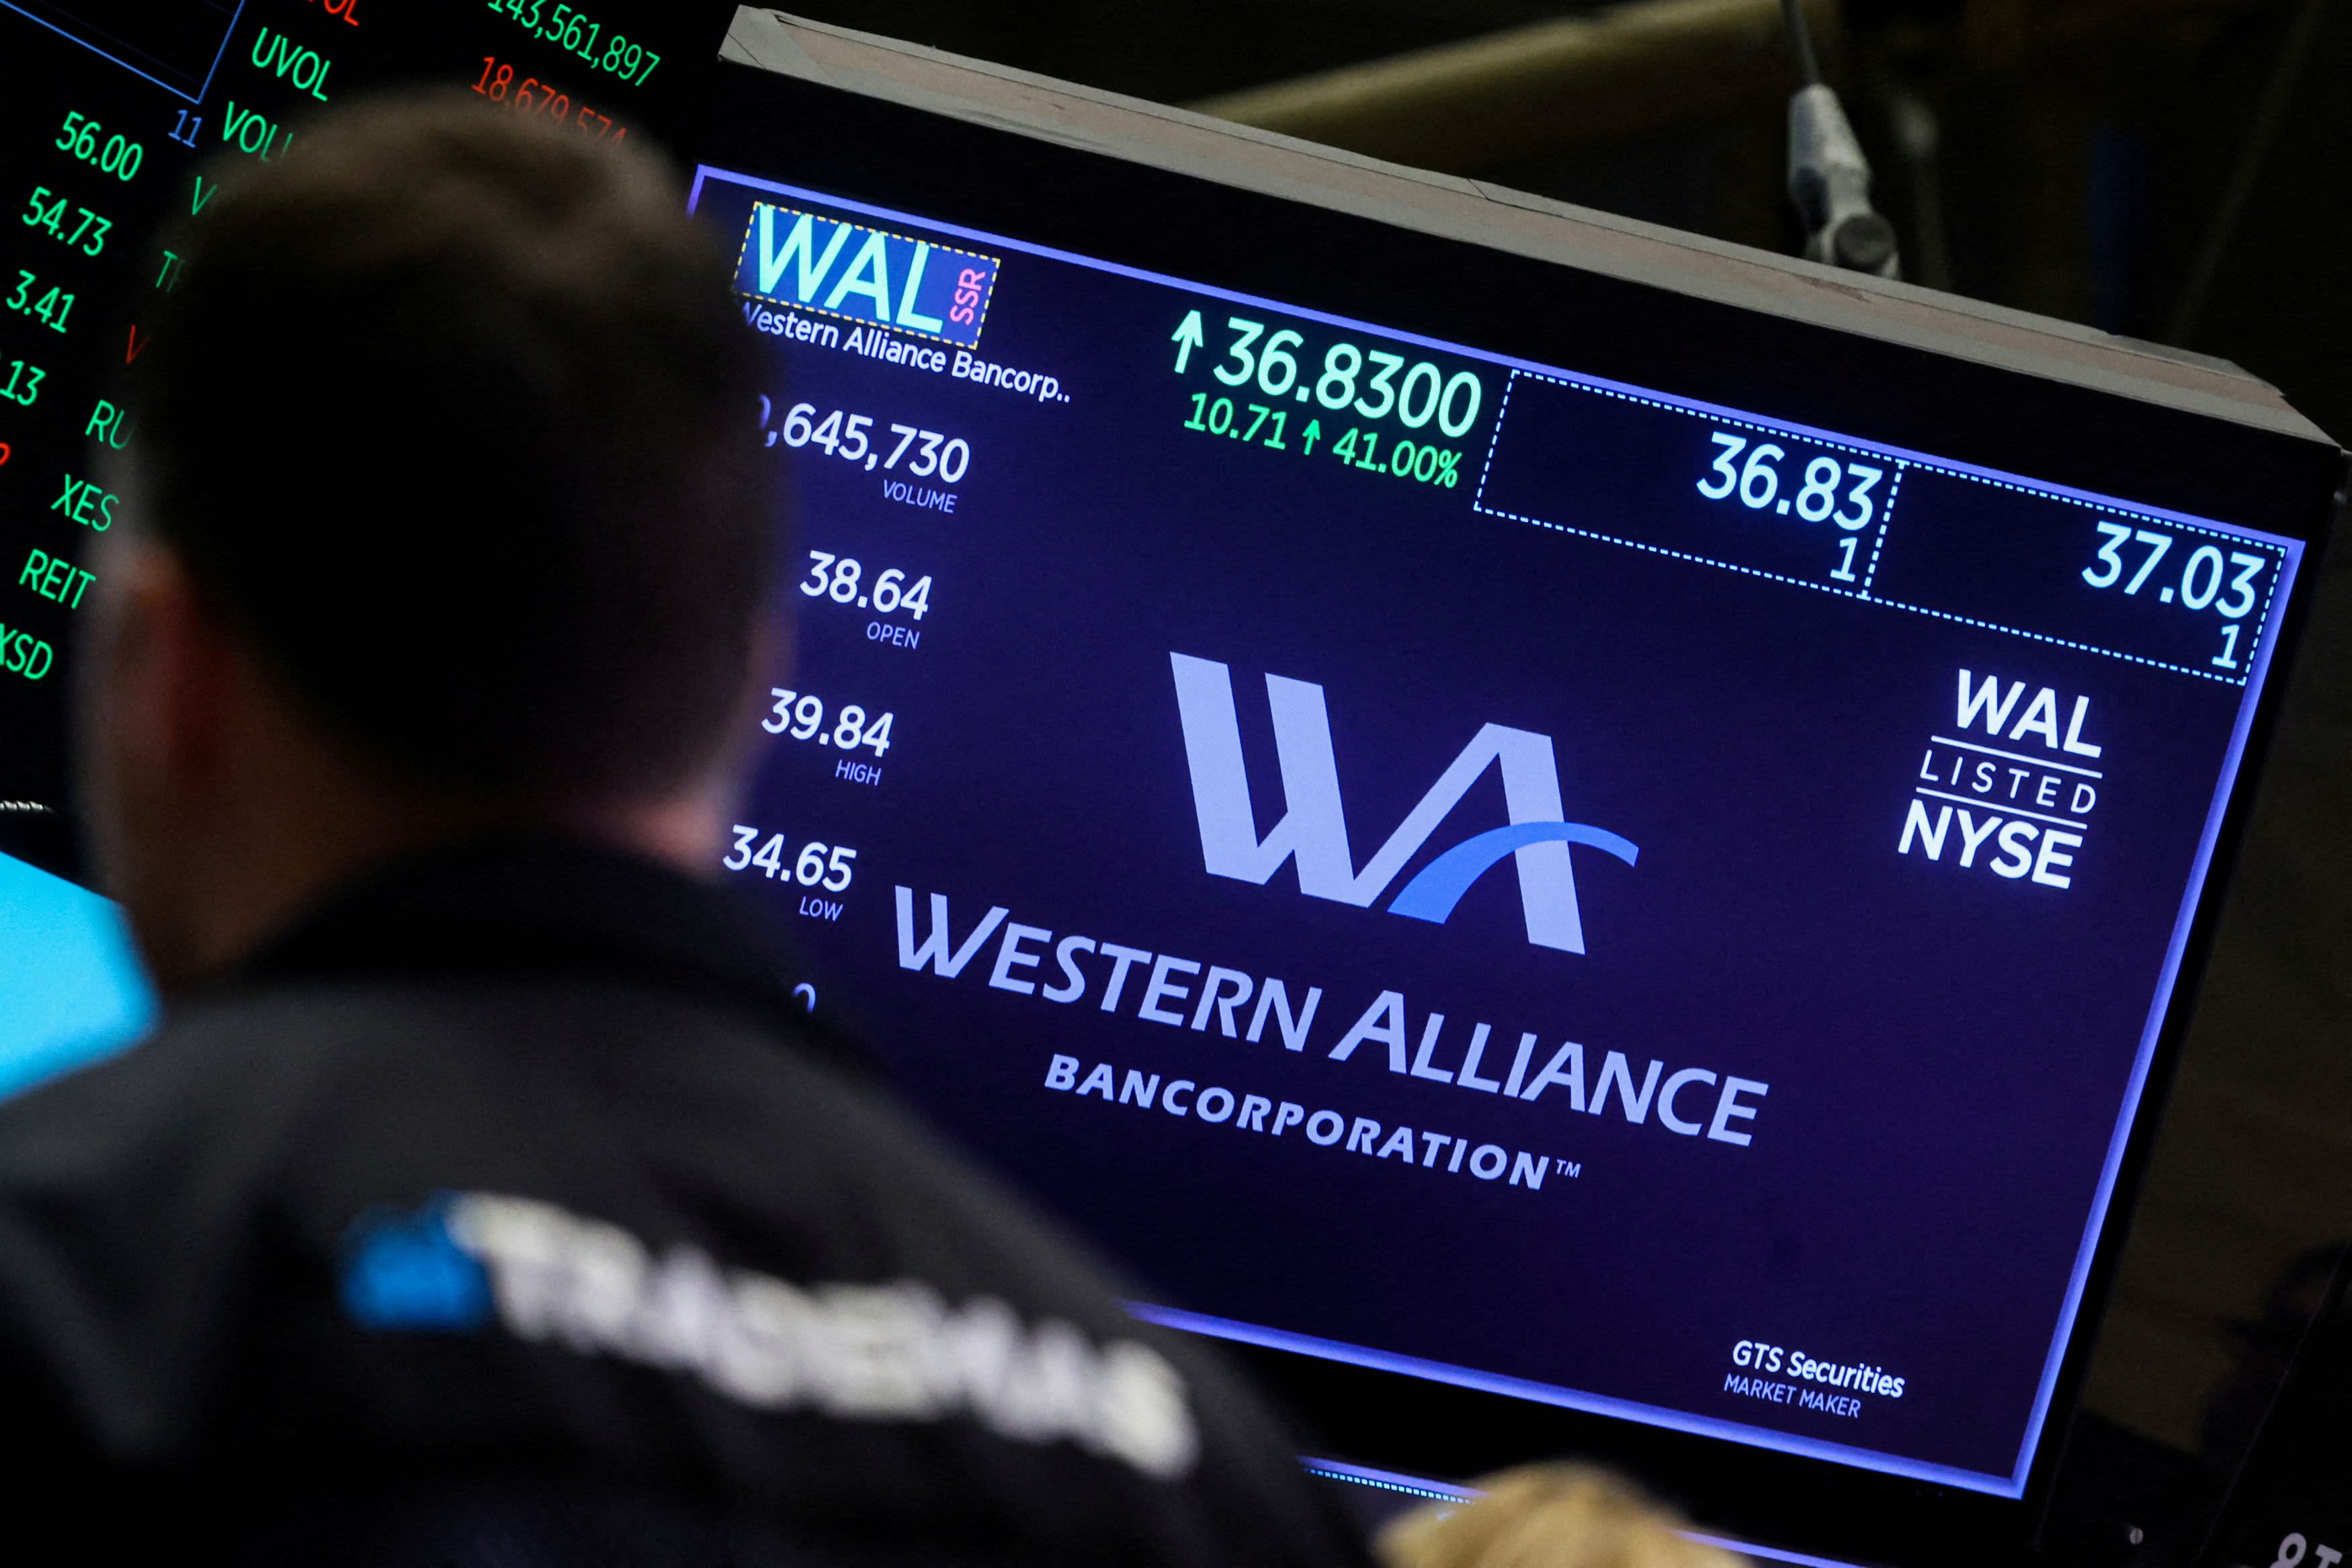 Bank of America says buy Western Alliance because it's not like the 3 failed banks, shares to rally more than 30%